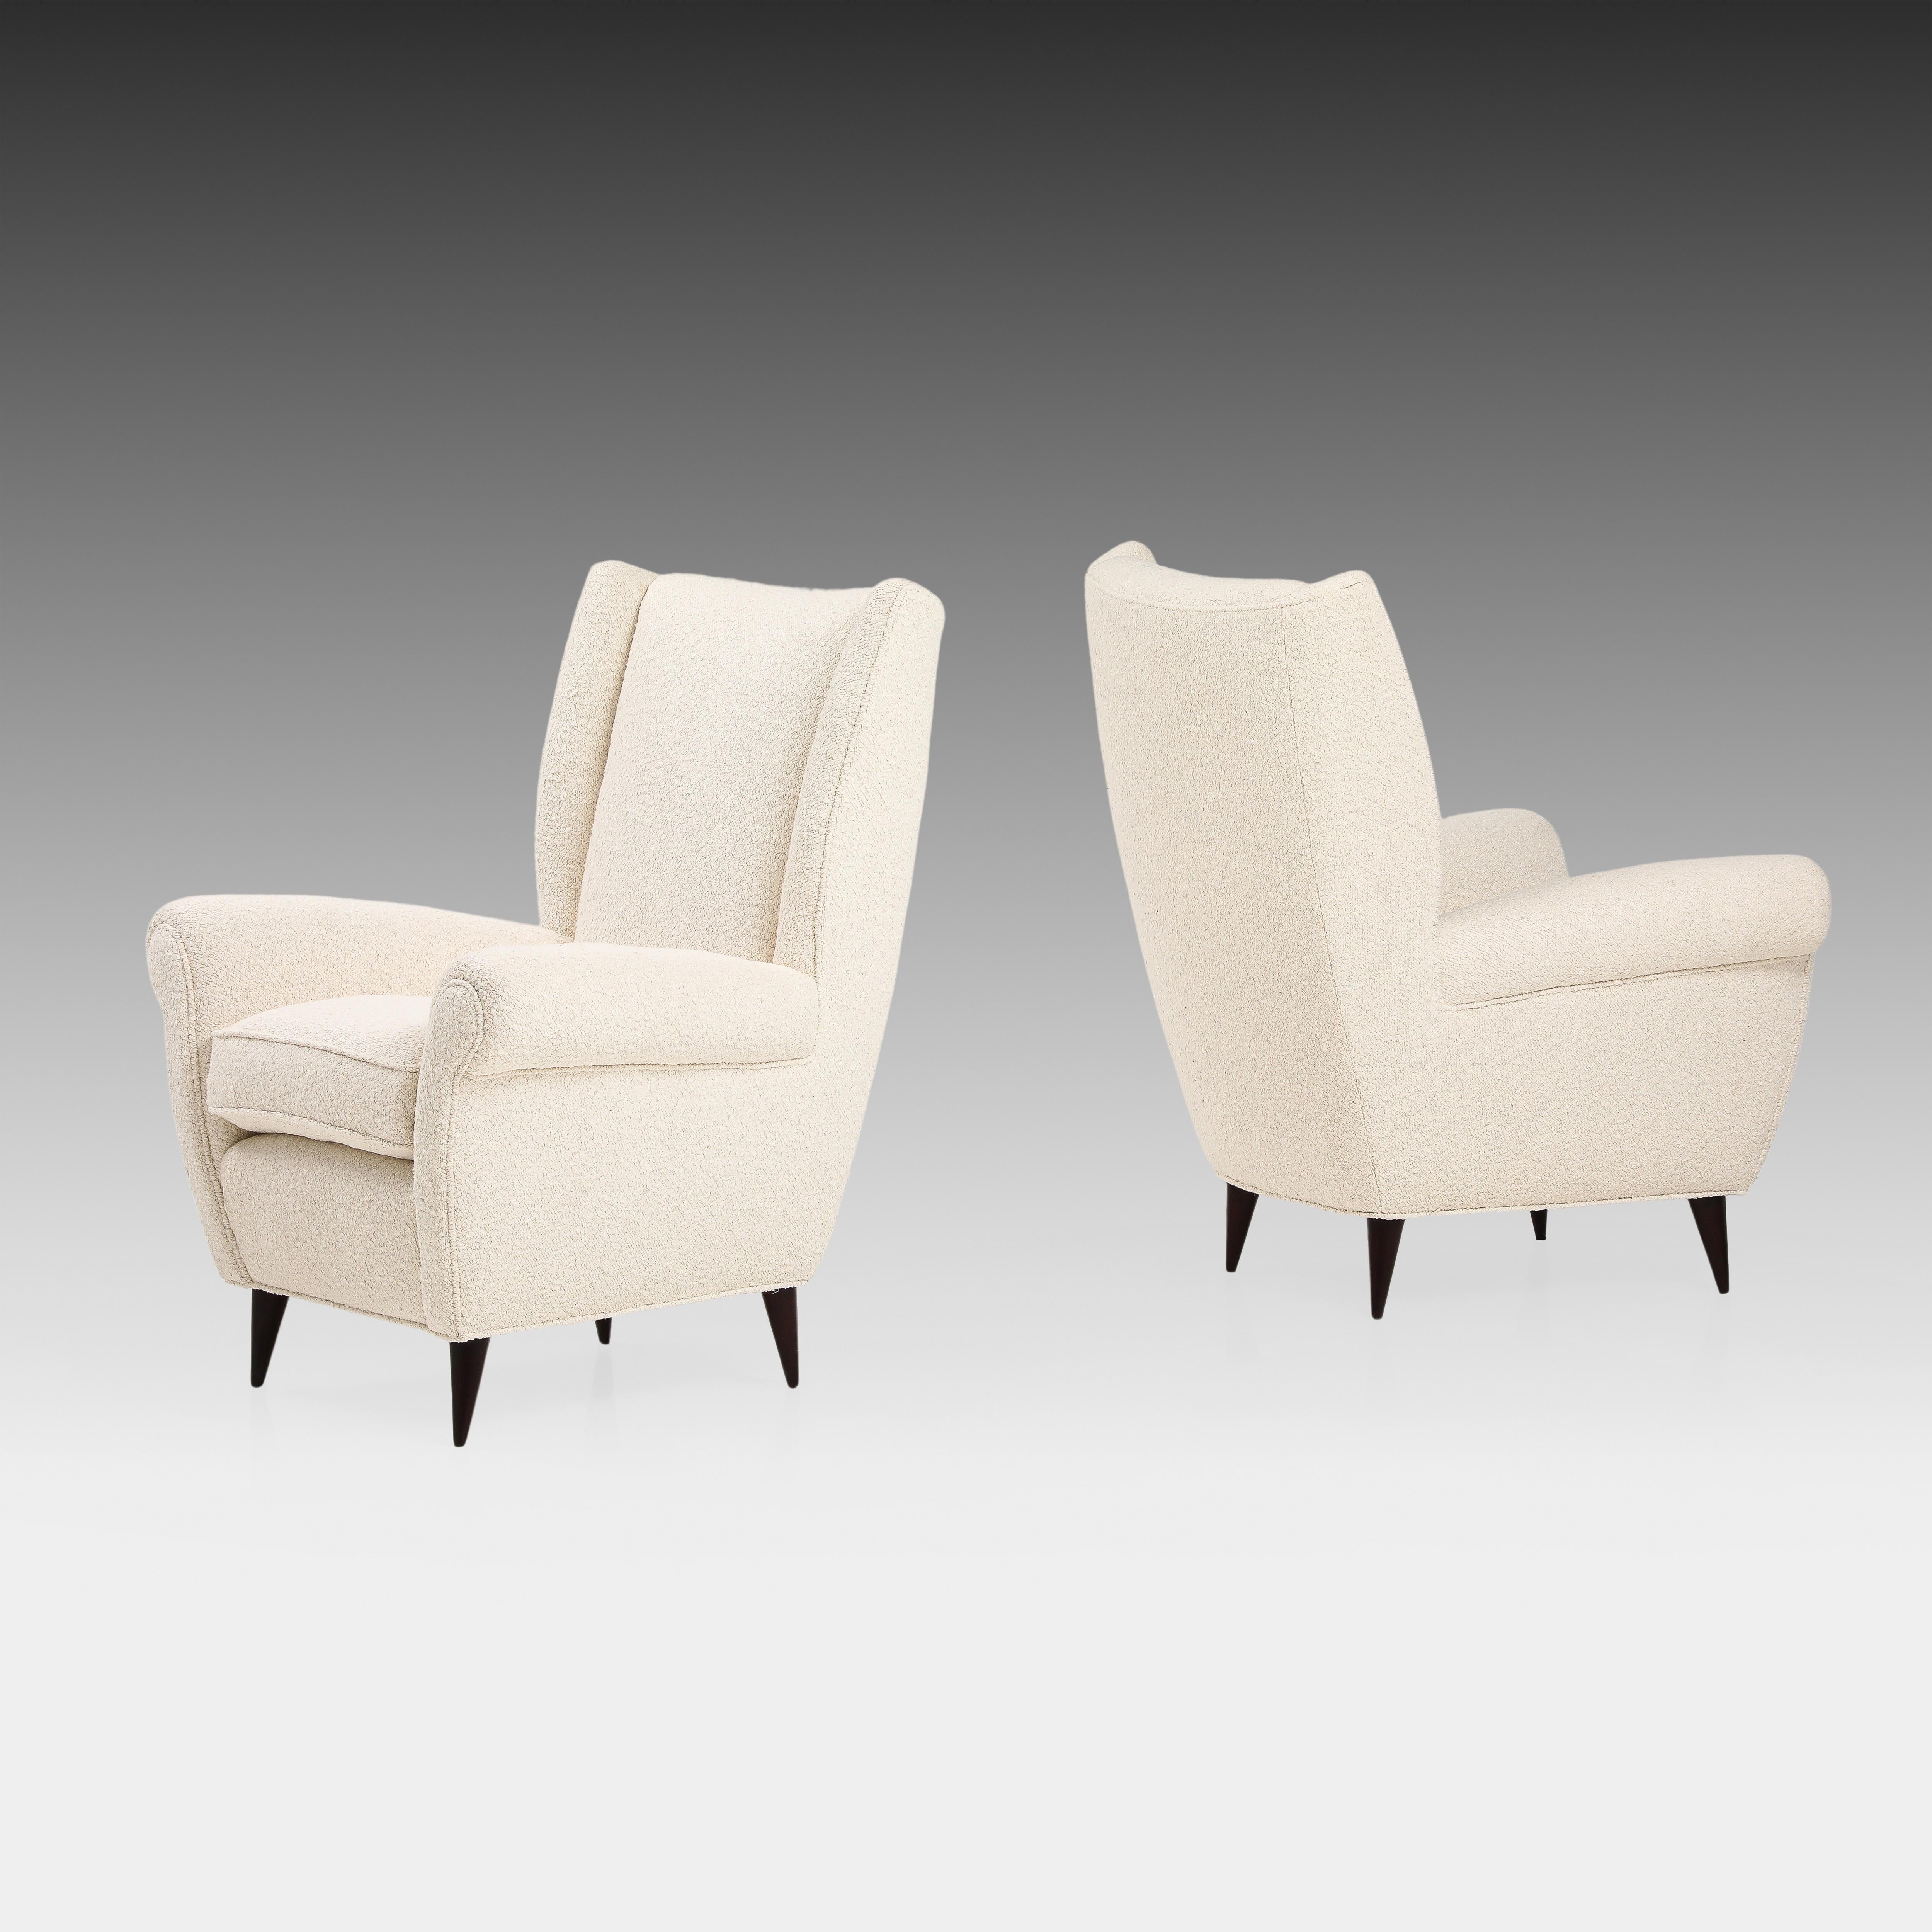 Mid-20th Century Gio Ponti Pair of High Back Armchairs in Ivory Bouclé, 1950s For Sale